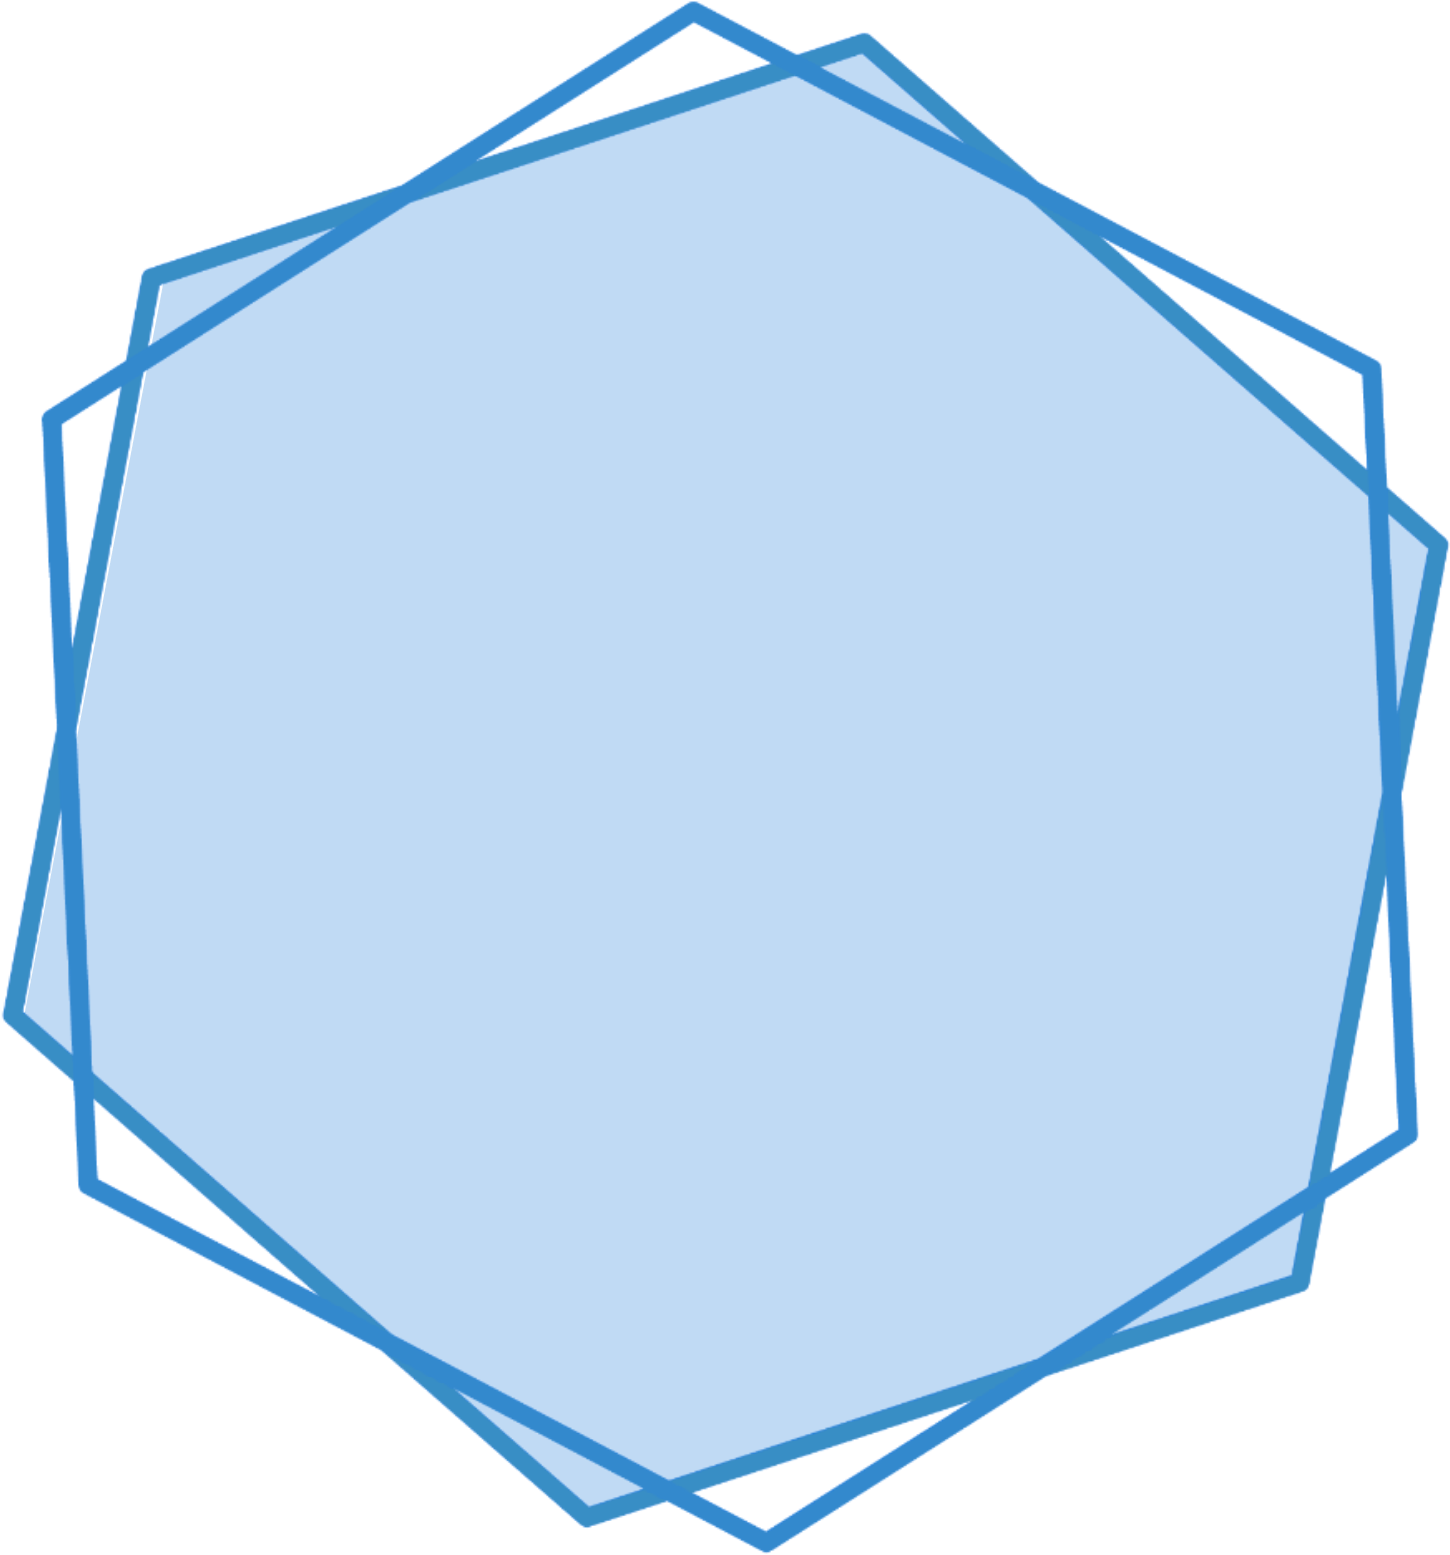 A Blue Hexagon With Black Background